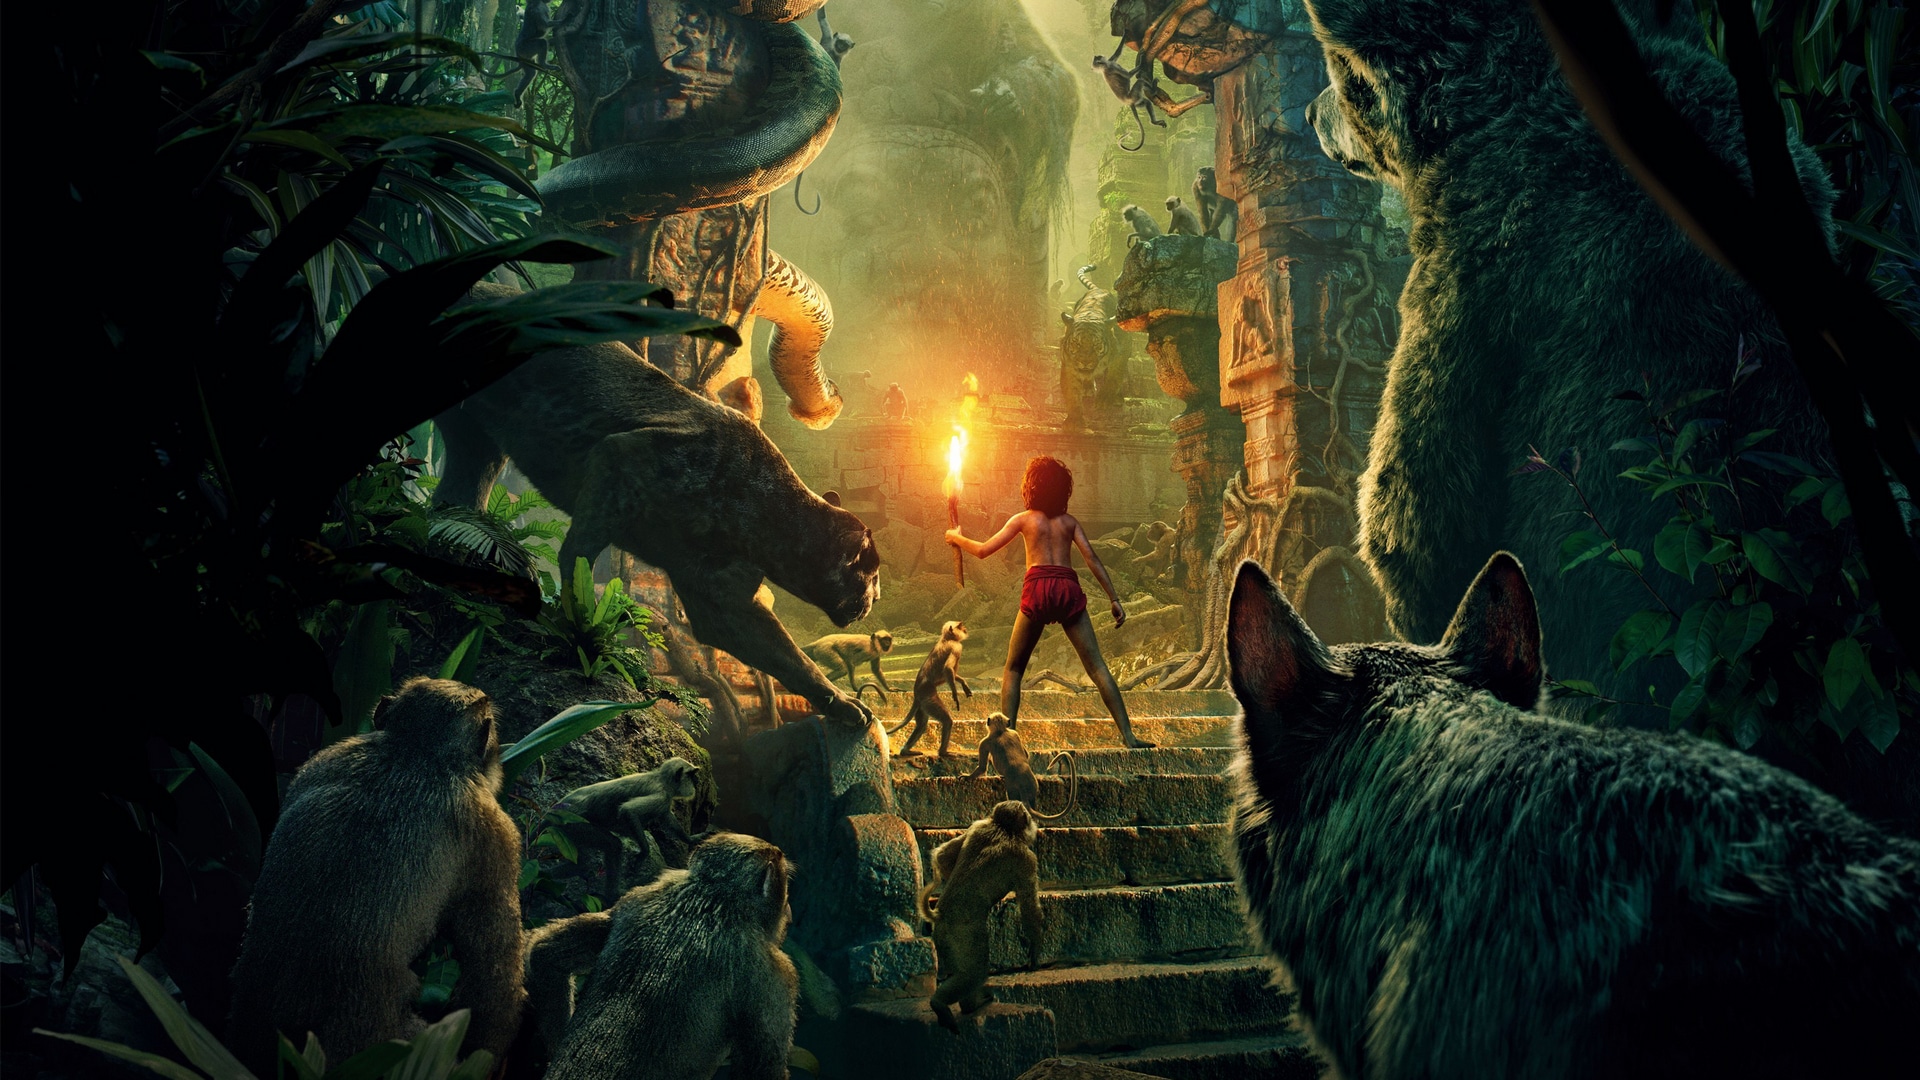 Wallpaper Id The Jungle Book Movies Animated